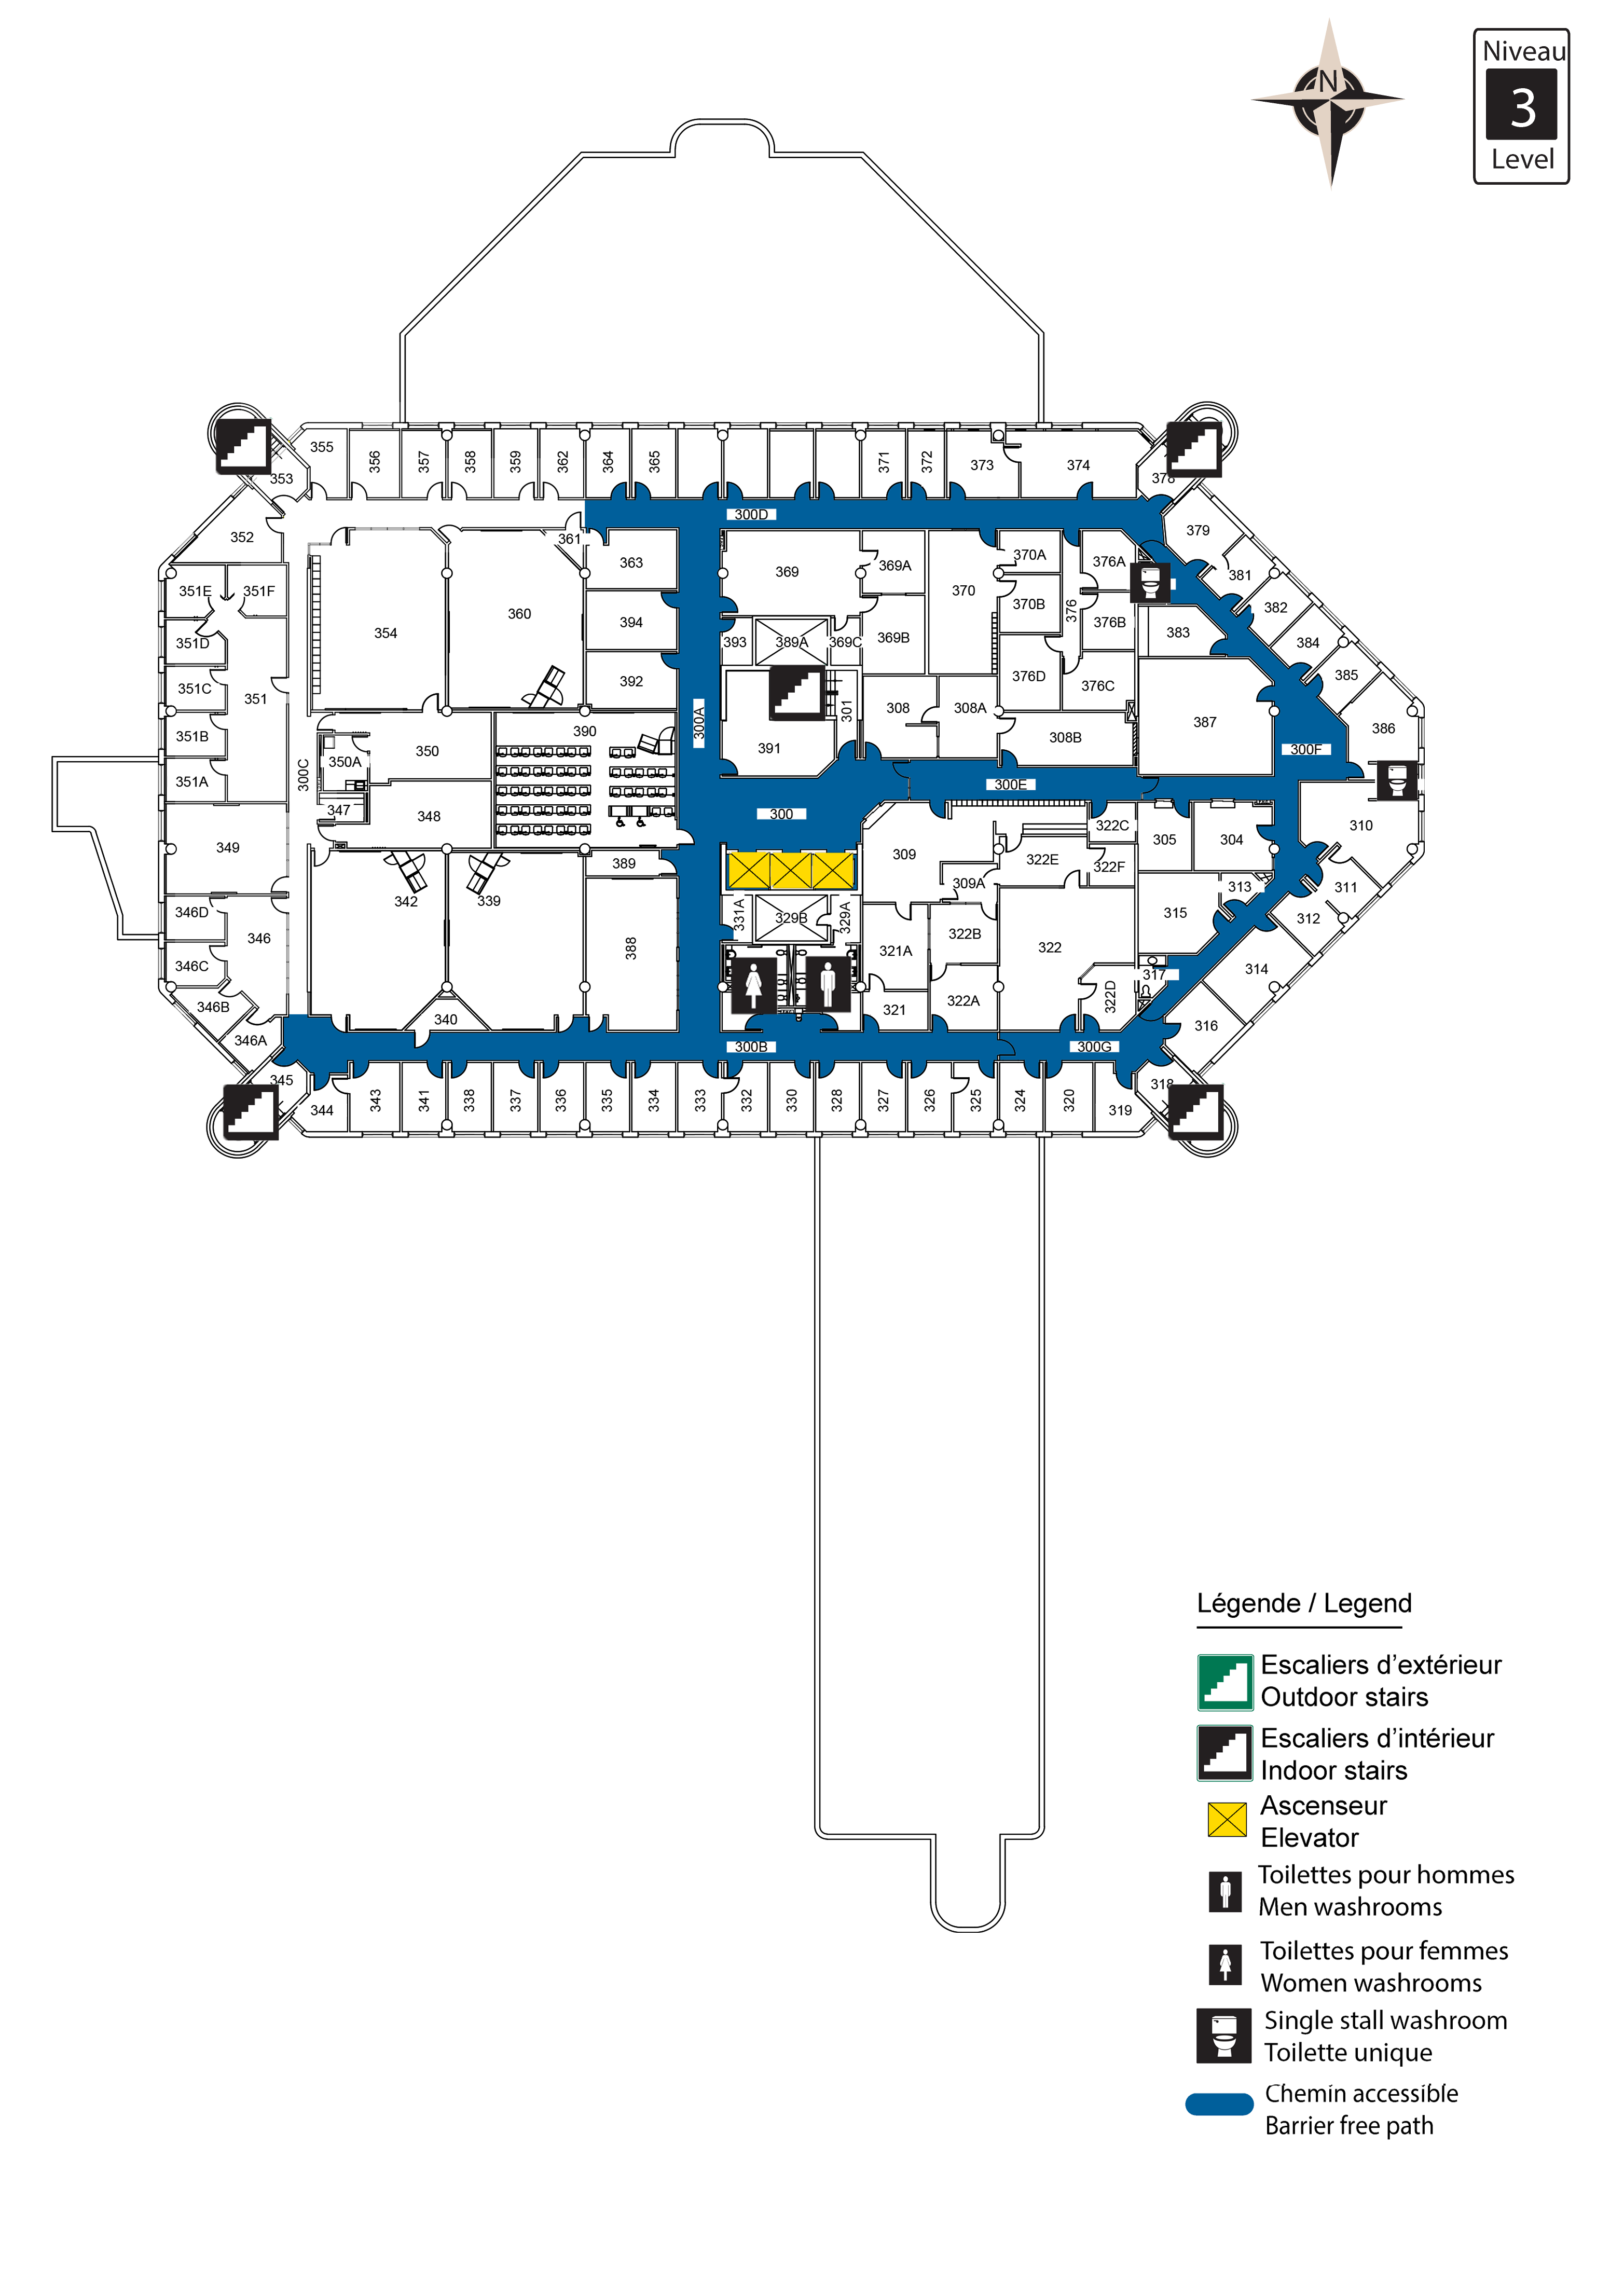 Accessible map of LMX level 3